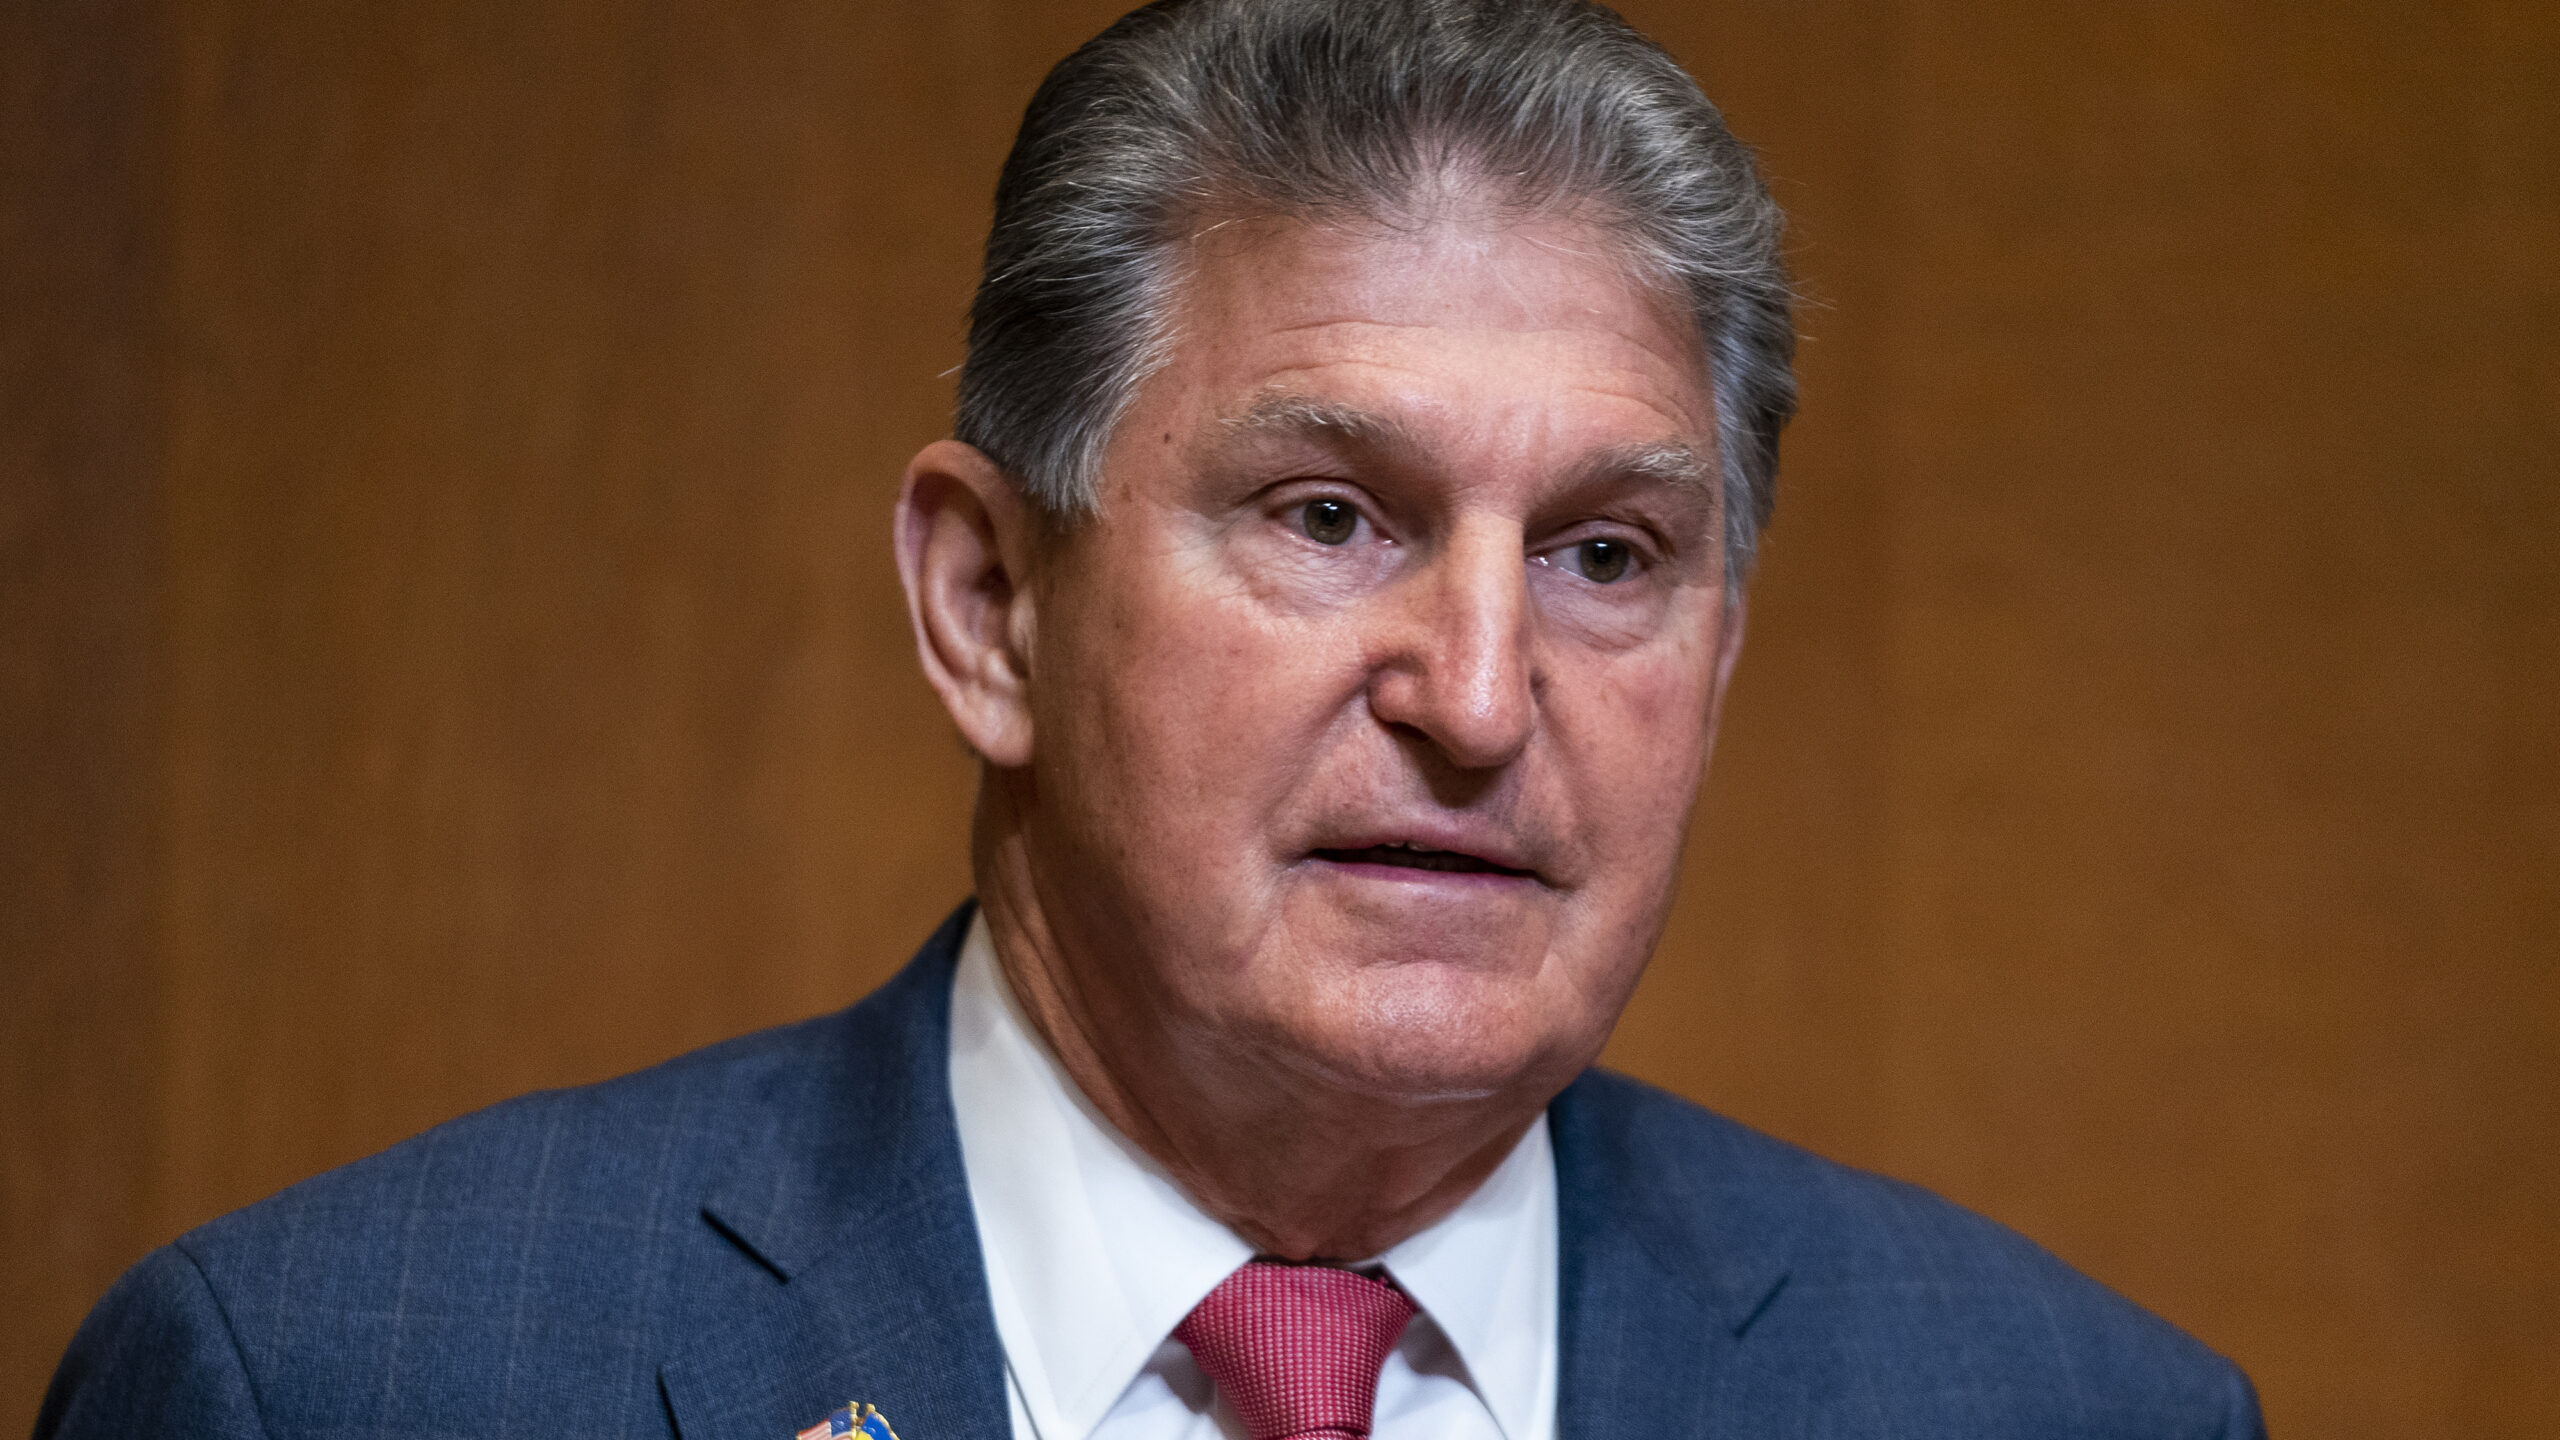 Manchin Calls EPA’s Push For Electric Cars A ‘Trojan Horse’ To Increase Dependence On China